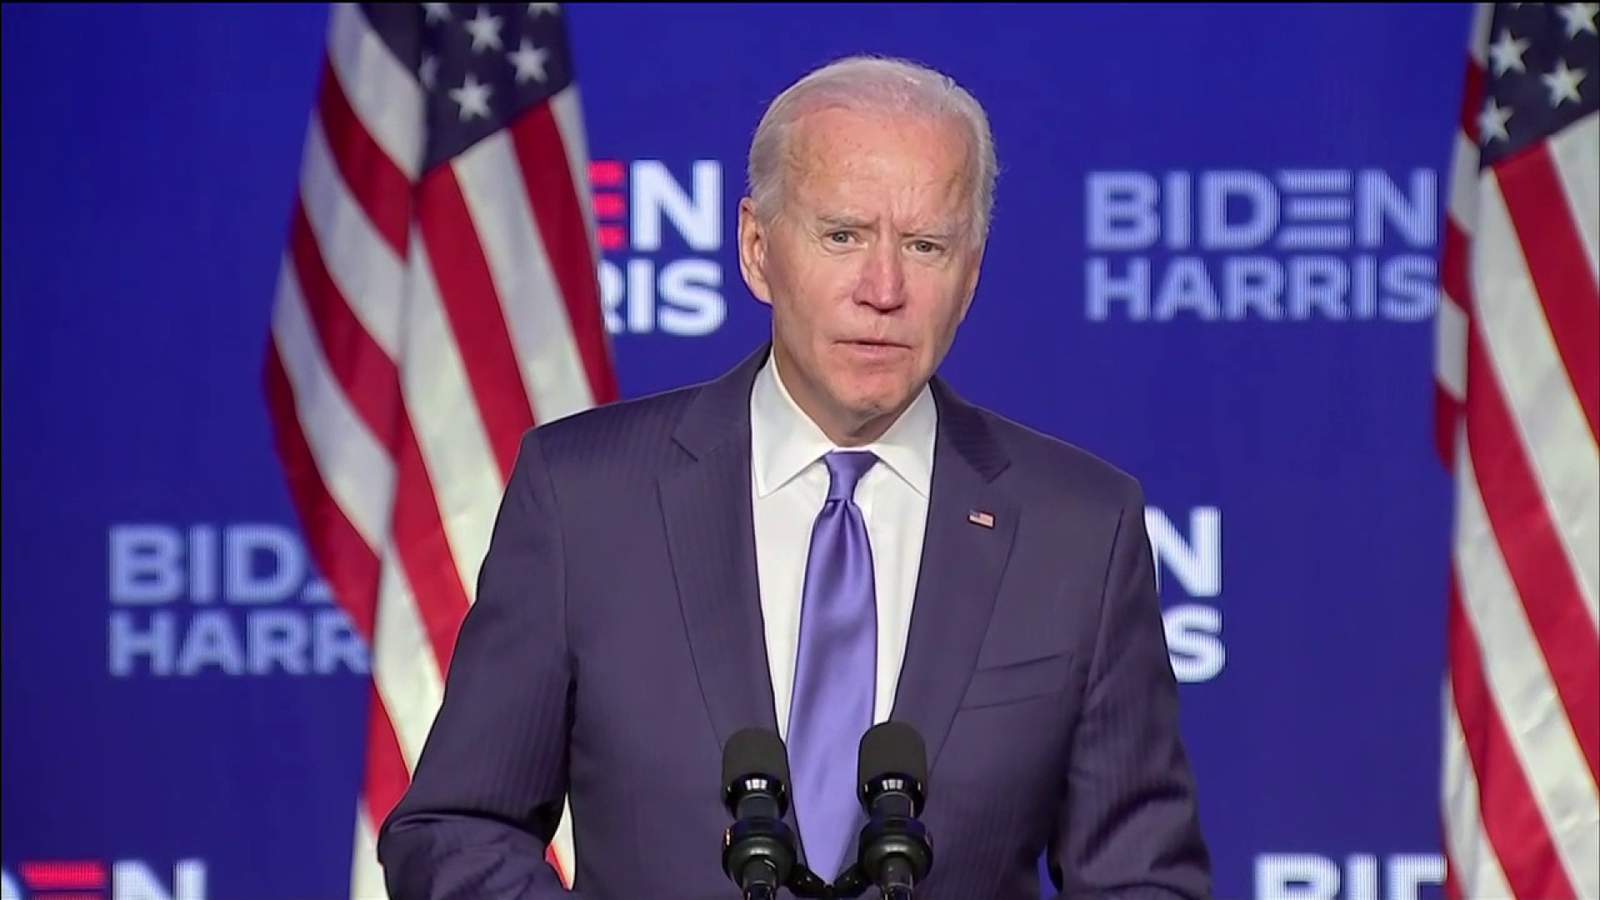 Biden: ‘We are going to win this race with a clear majority’